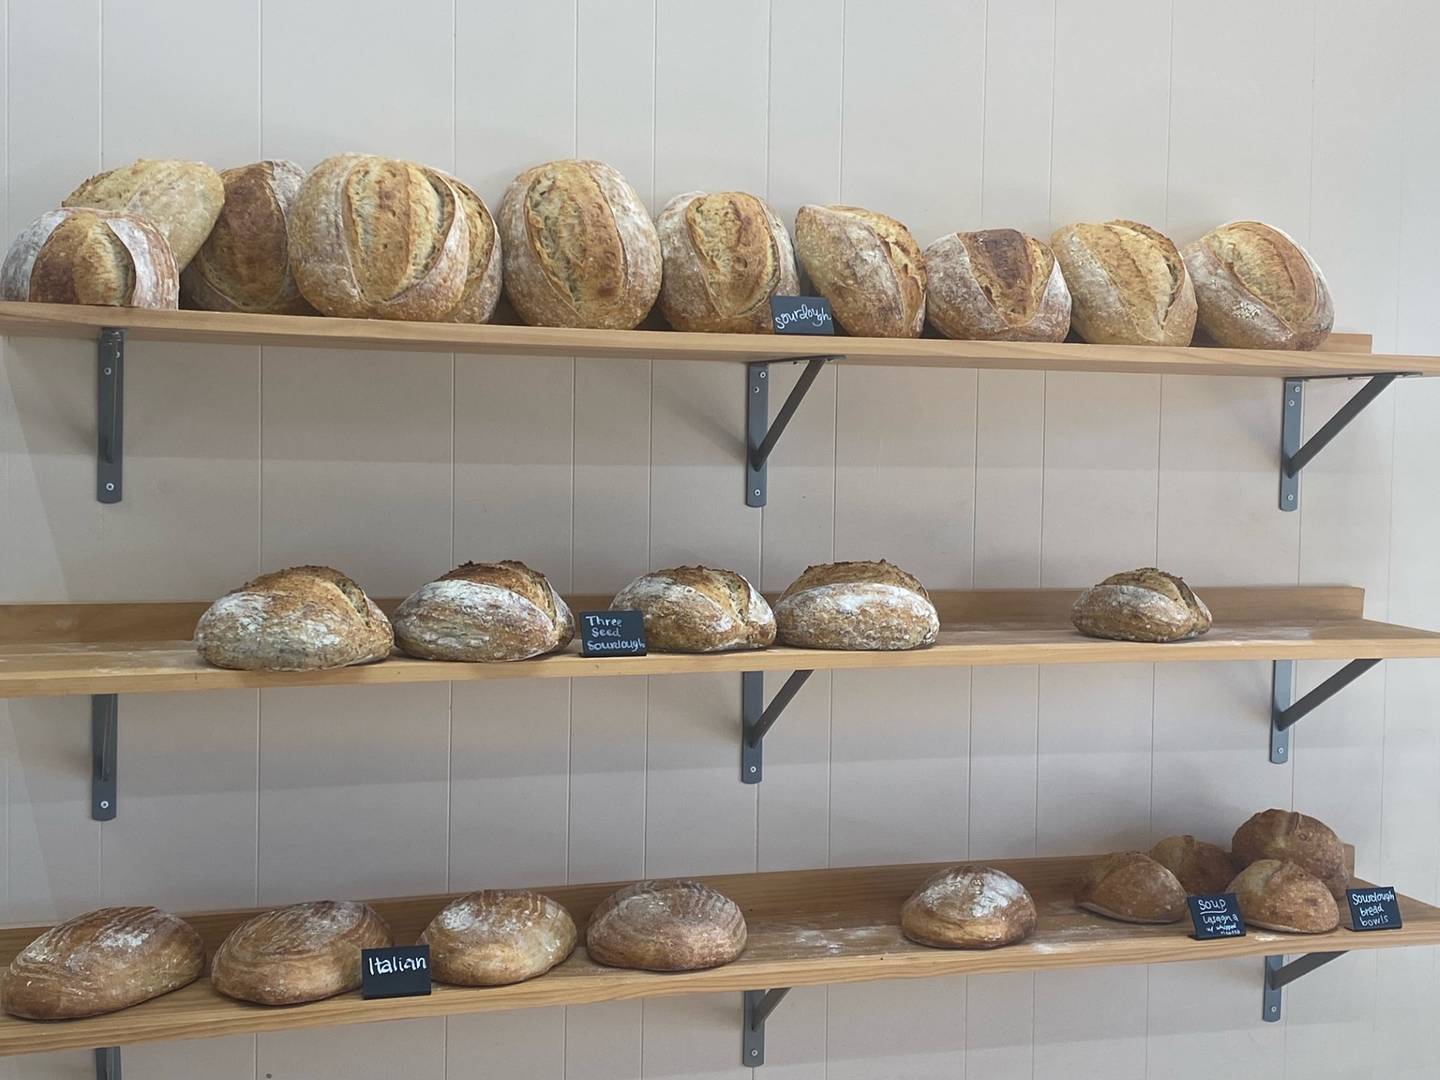 Millstone specializes in making different types of bread, with five options offered daily: sourdough, multigrain, Italian, baguette and focaccia.